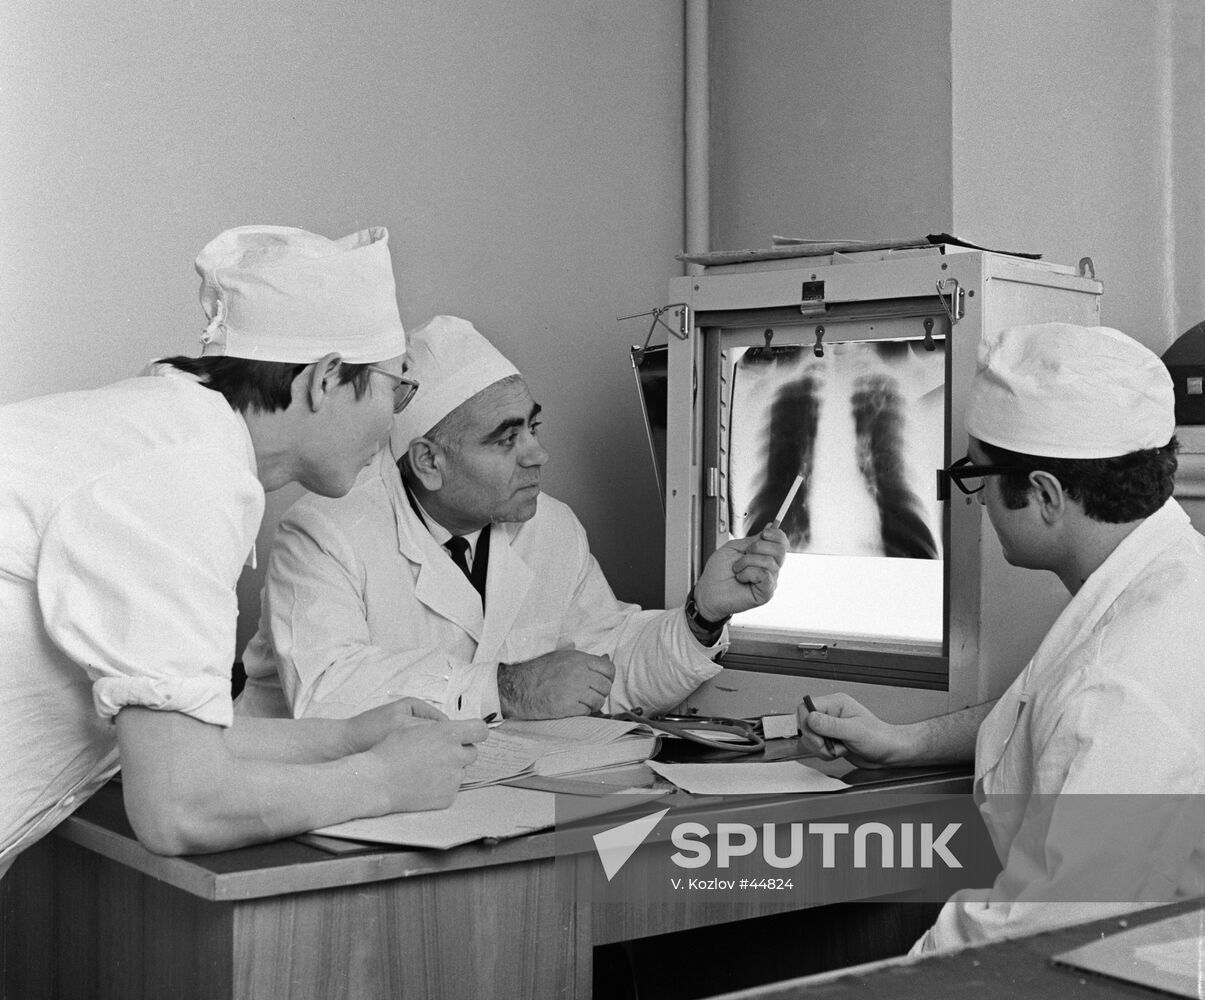 SPECIALISTS TUBERCULOSIS RESEARCH X-RAY 